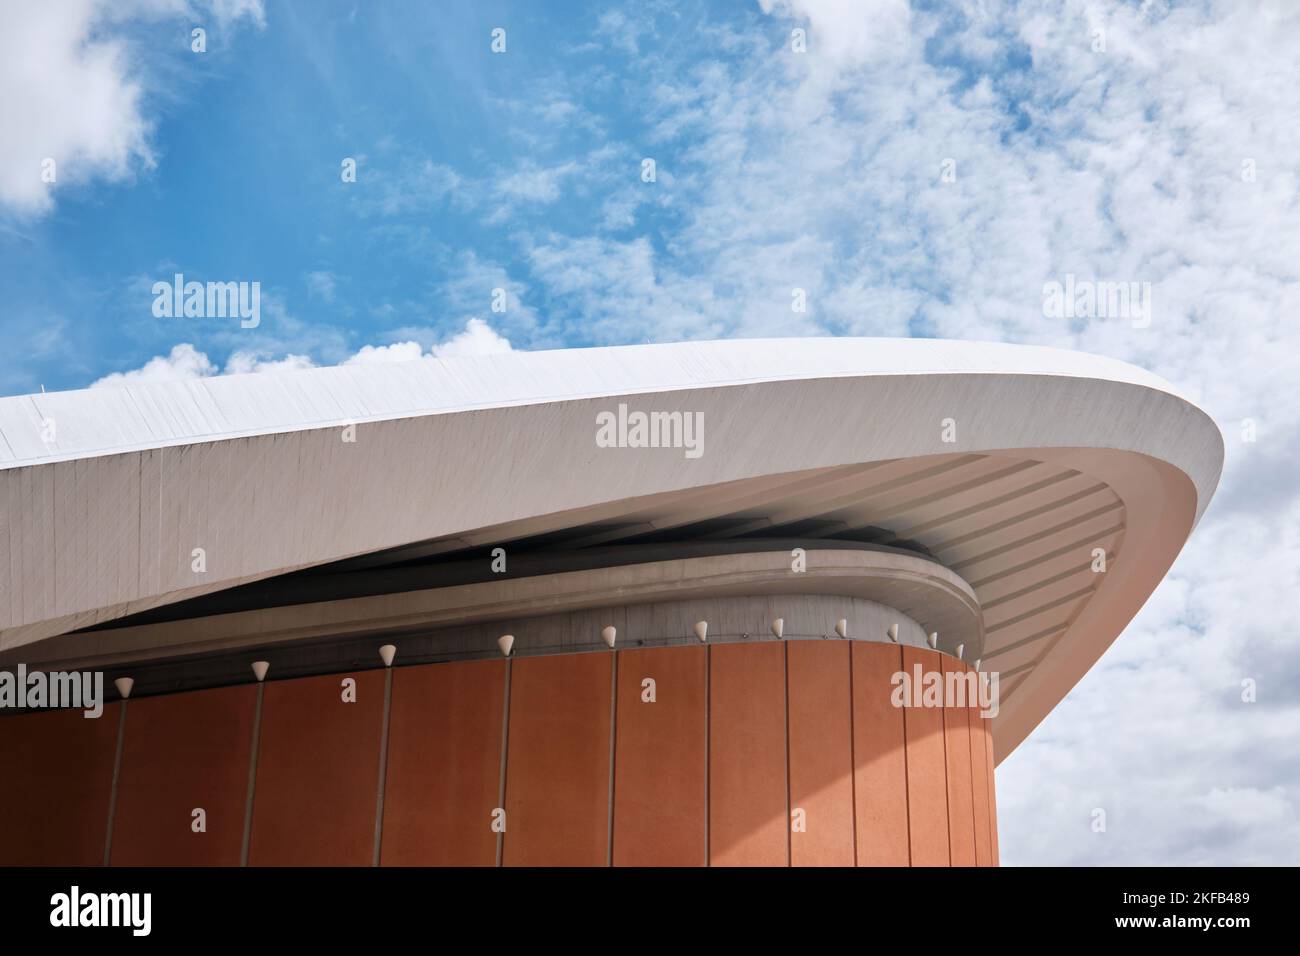 Berlin, Germany - Sept 2022:  The Haus der Kulturen der Welt (House of the World's Cultures). It is a centre of international contemporary arts. Stock Photo